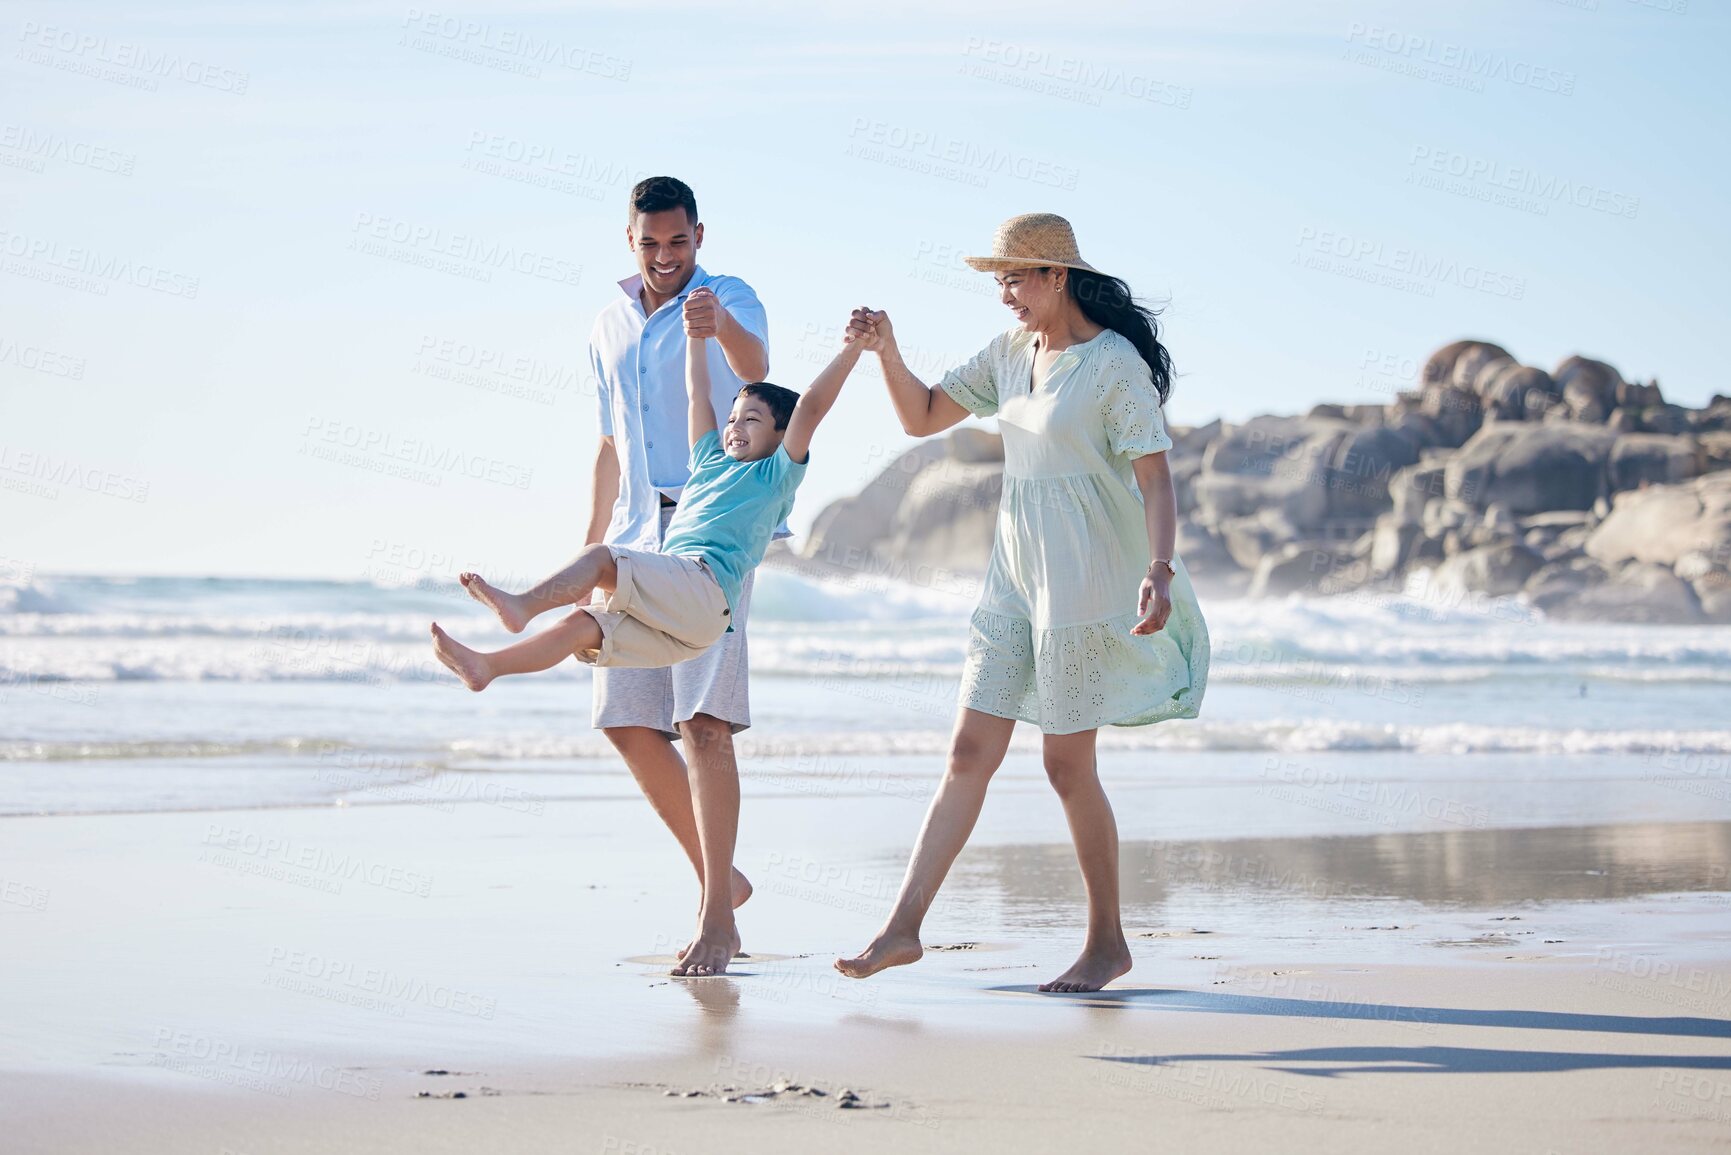 Buy stock photo Family, mother and father with a child at the beach for fun, adventure and play on holiday. A happy woman, man and young kid walking on sand or swinging on vacation at the ocean, nature or outdoor